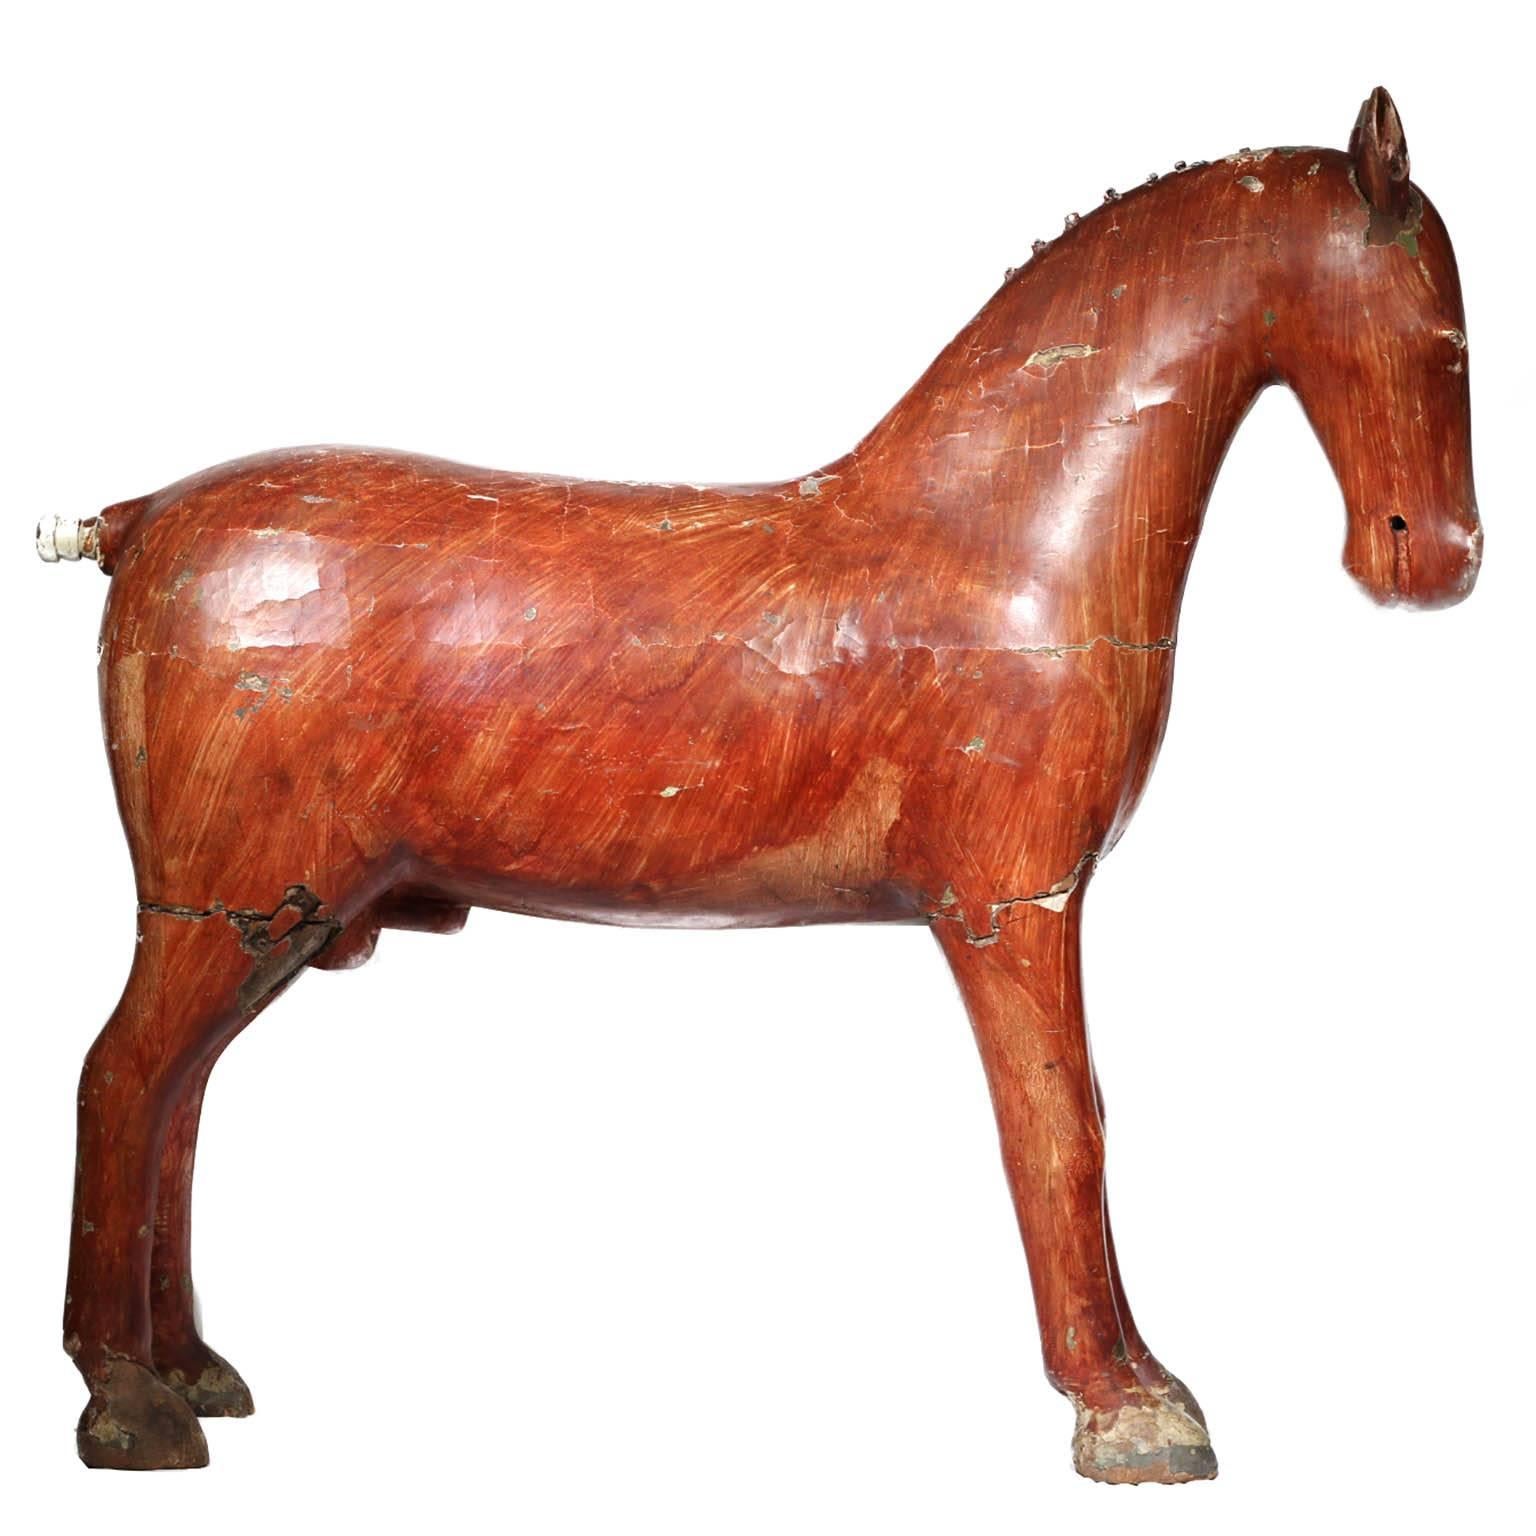 19th Century Distressed Painted Wooden Figure of a Horse